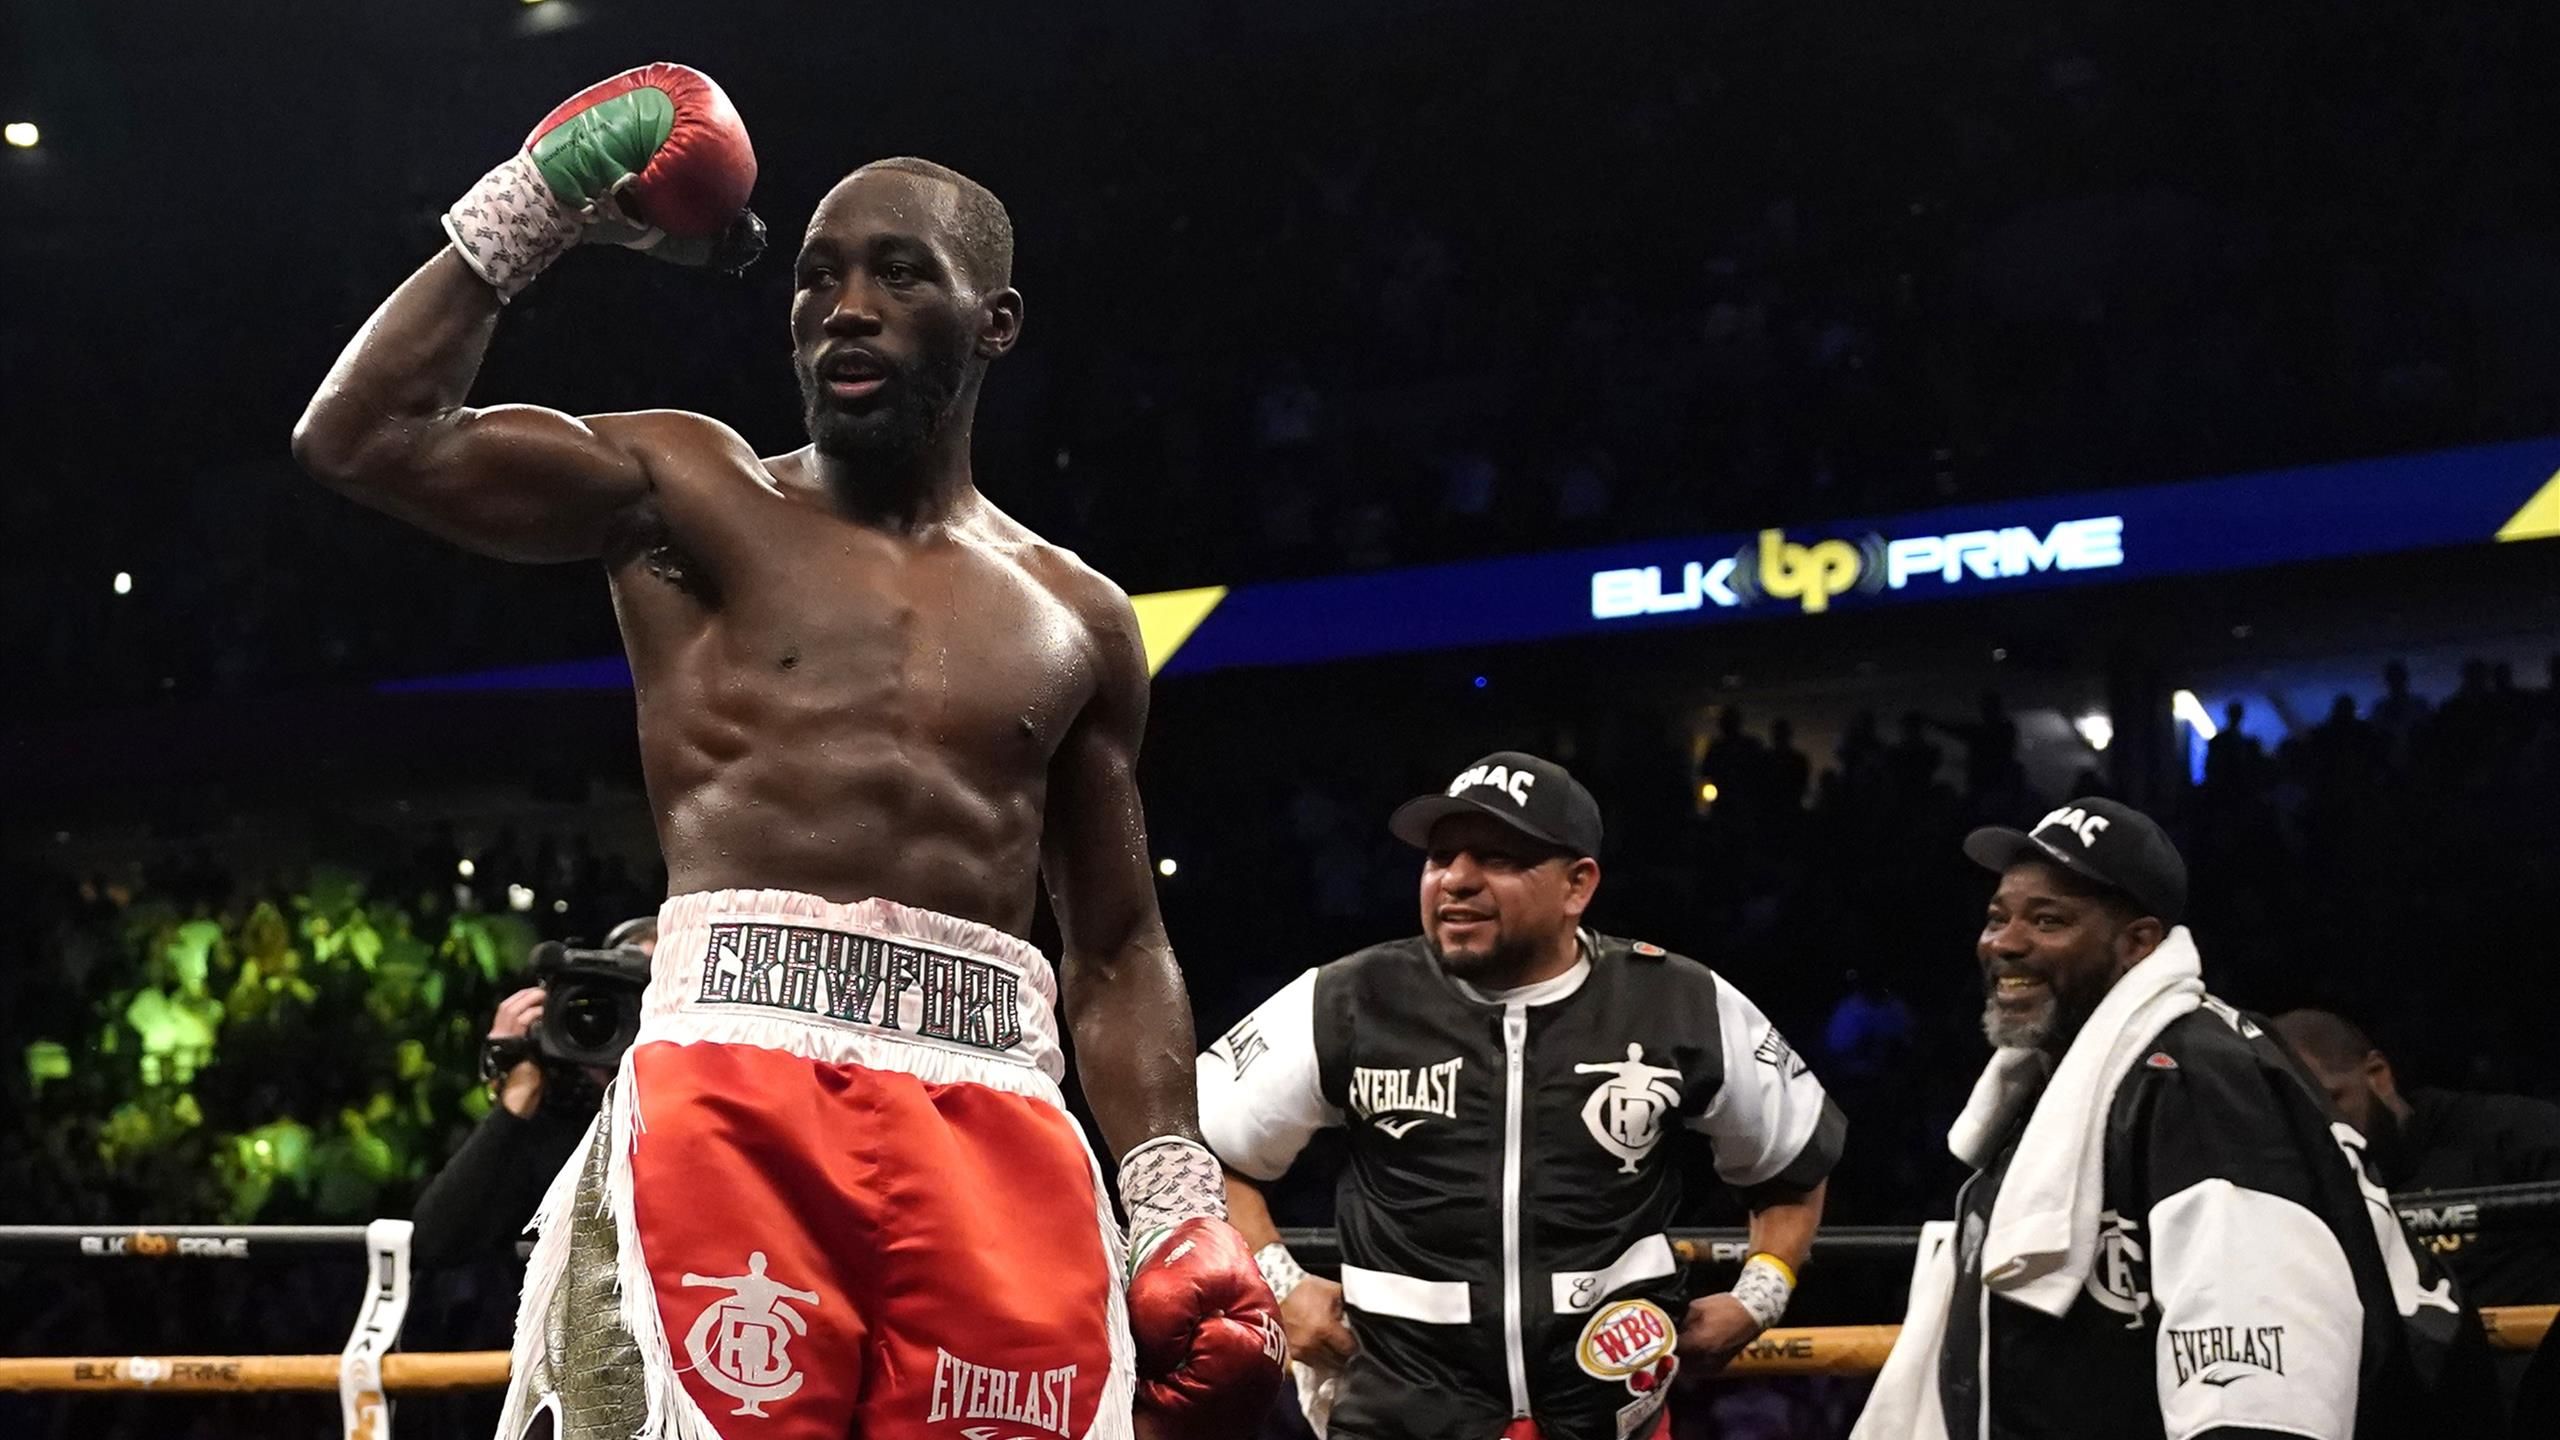 How to watch Errol Spence Jr v Terence Crawford on TNT Sports to determine undisputed welterweight world champion